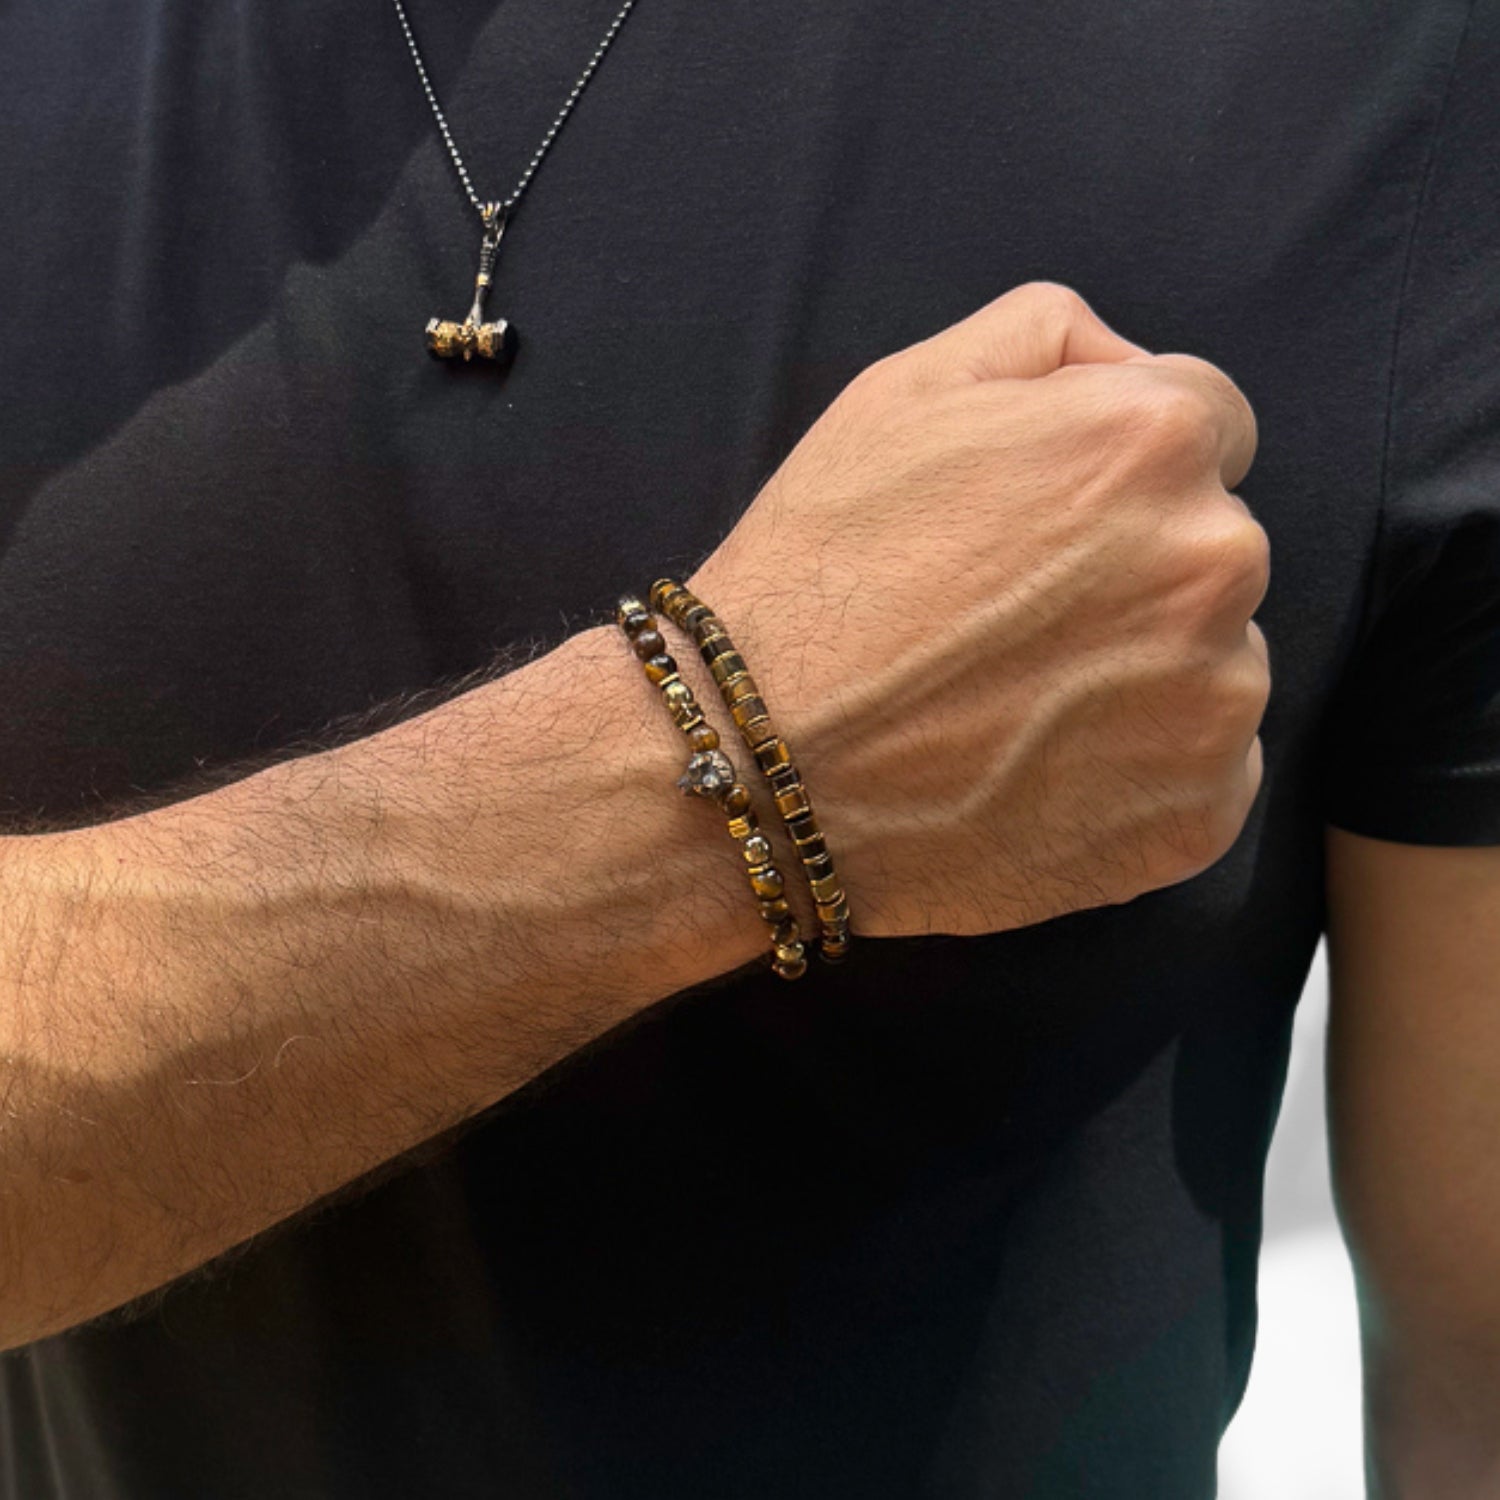 Elegant Tiger's Eye Stone Bracelet for Men with a 6mm bead size and a symbolic bronze wolf centerpiece